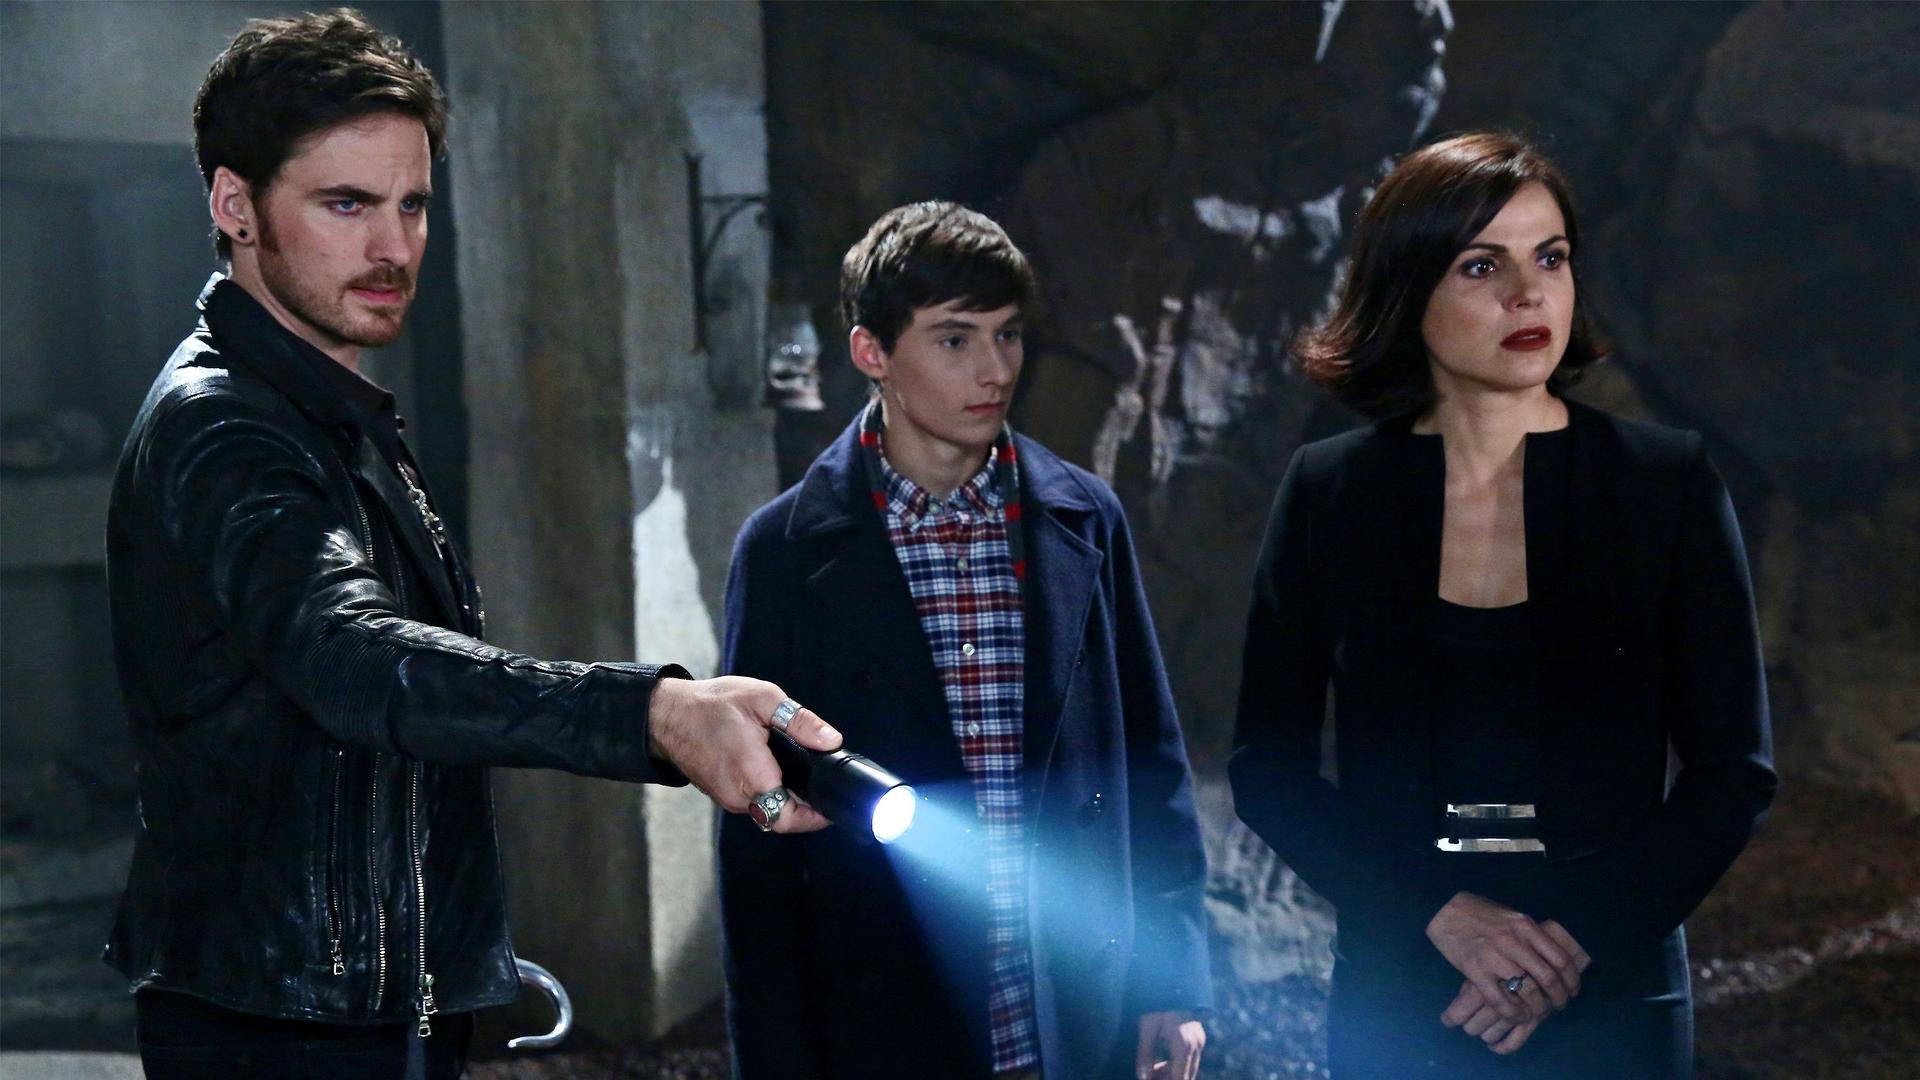 Once upon a time season 5 episode 9 torrent love again cedric gervais extended mix torrent